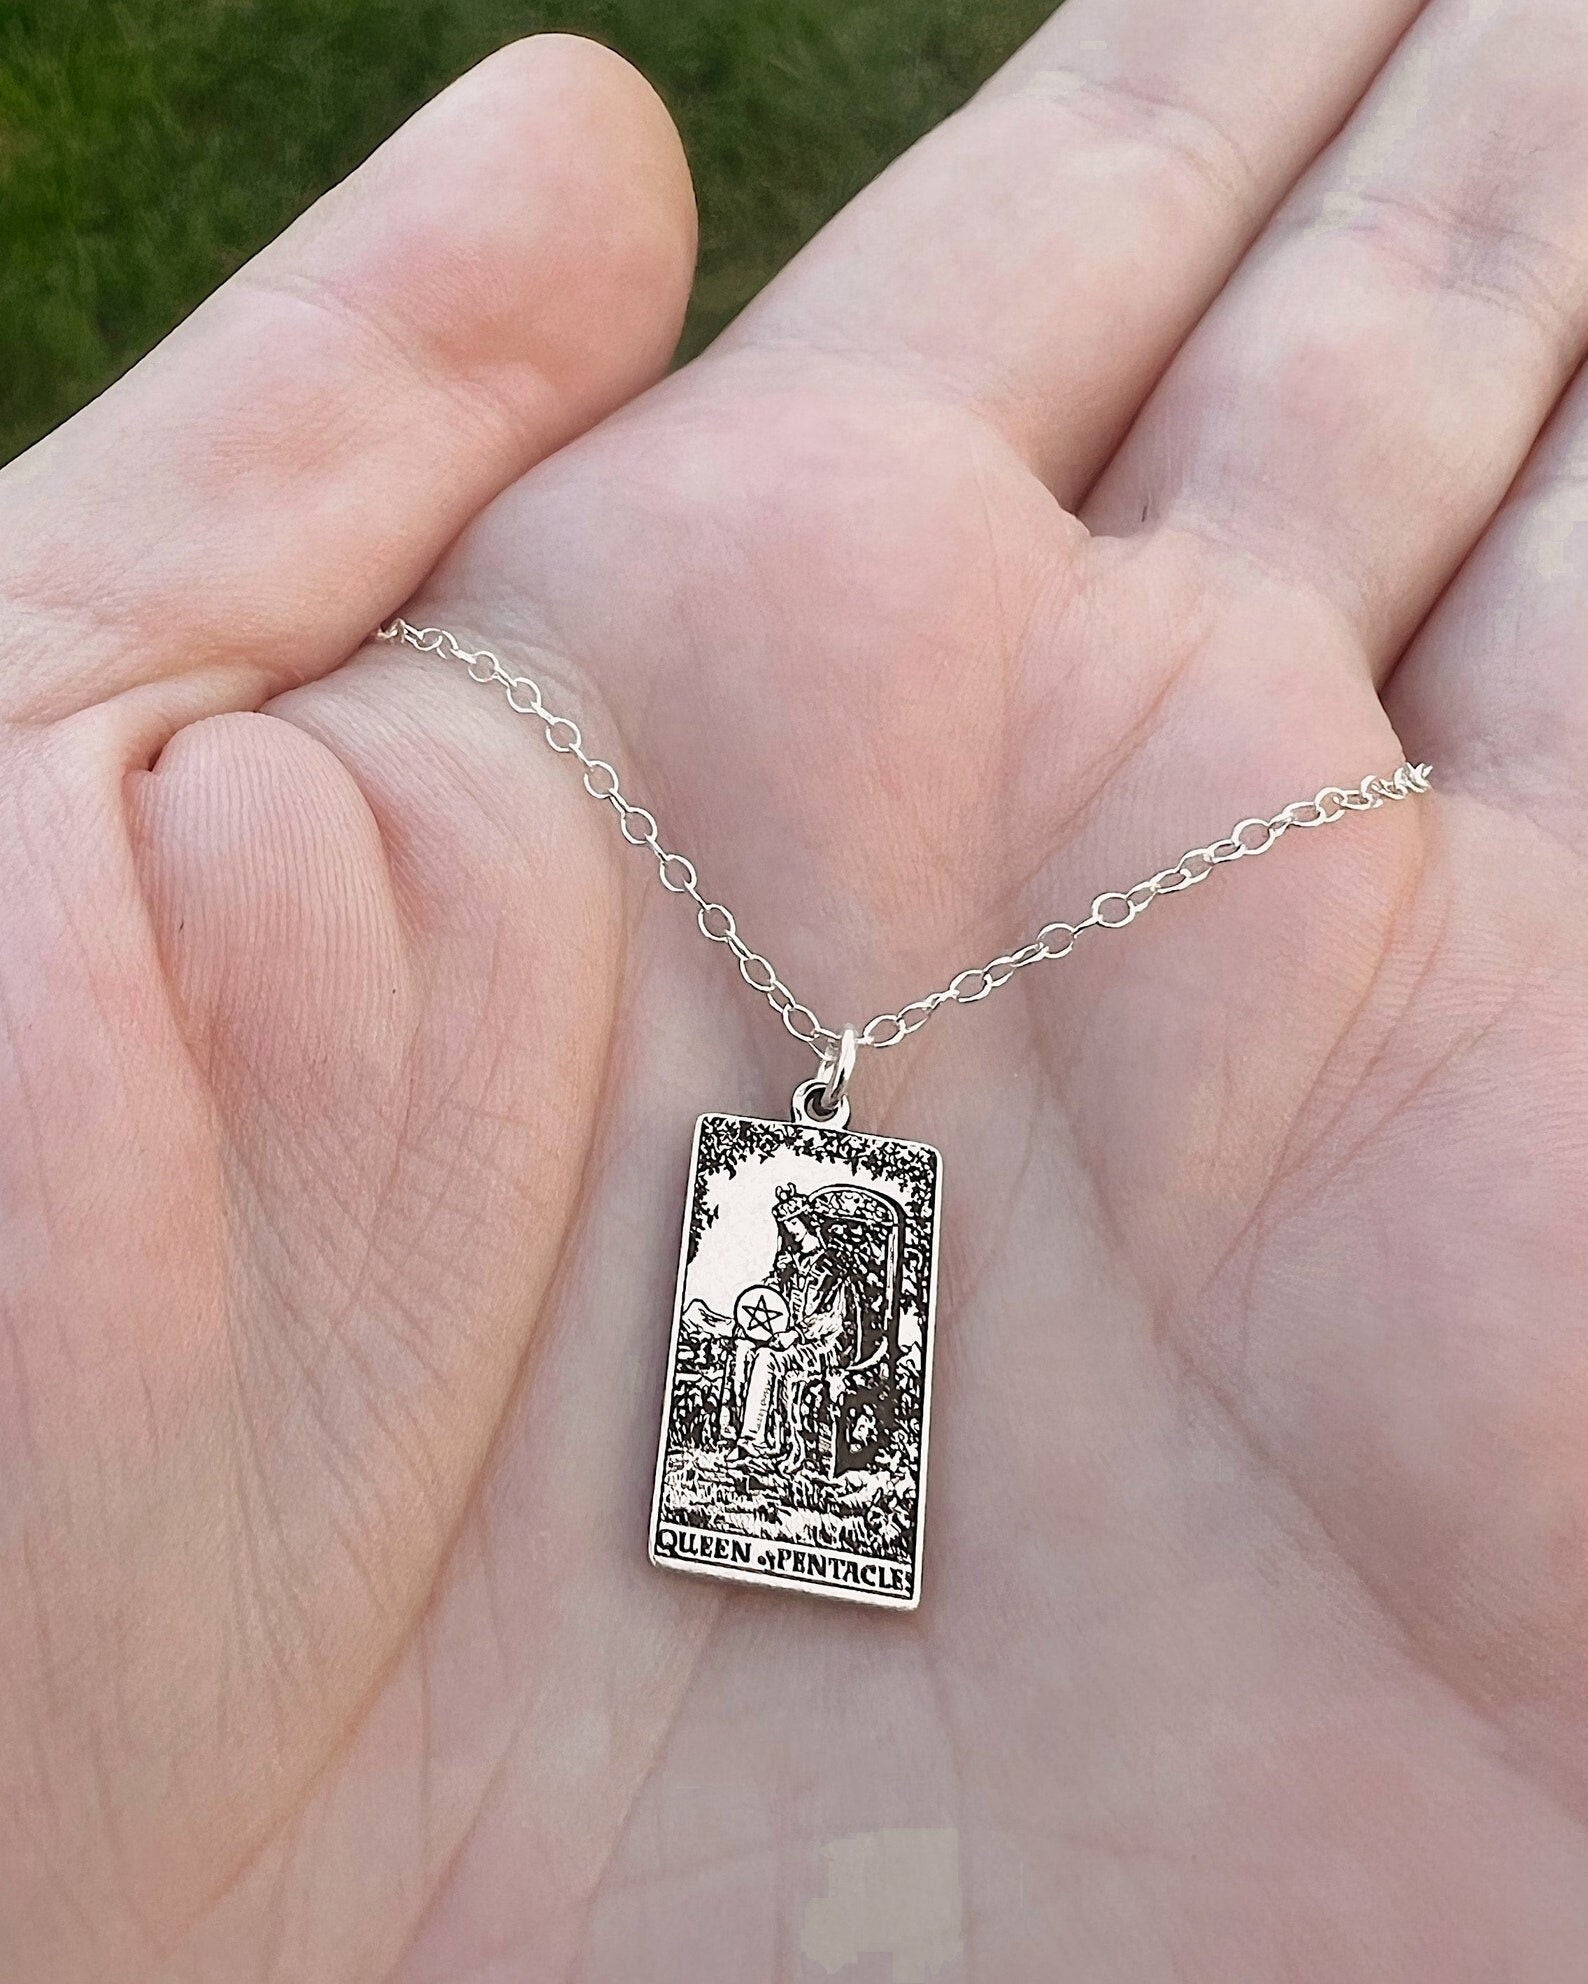 Queen of Pentacles Tarot Card Necklace - Sterling Silver